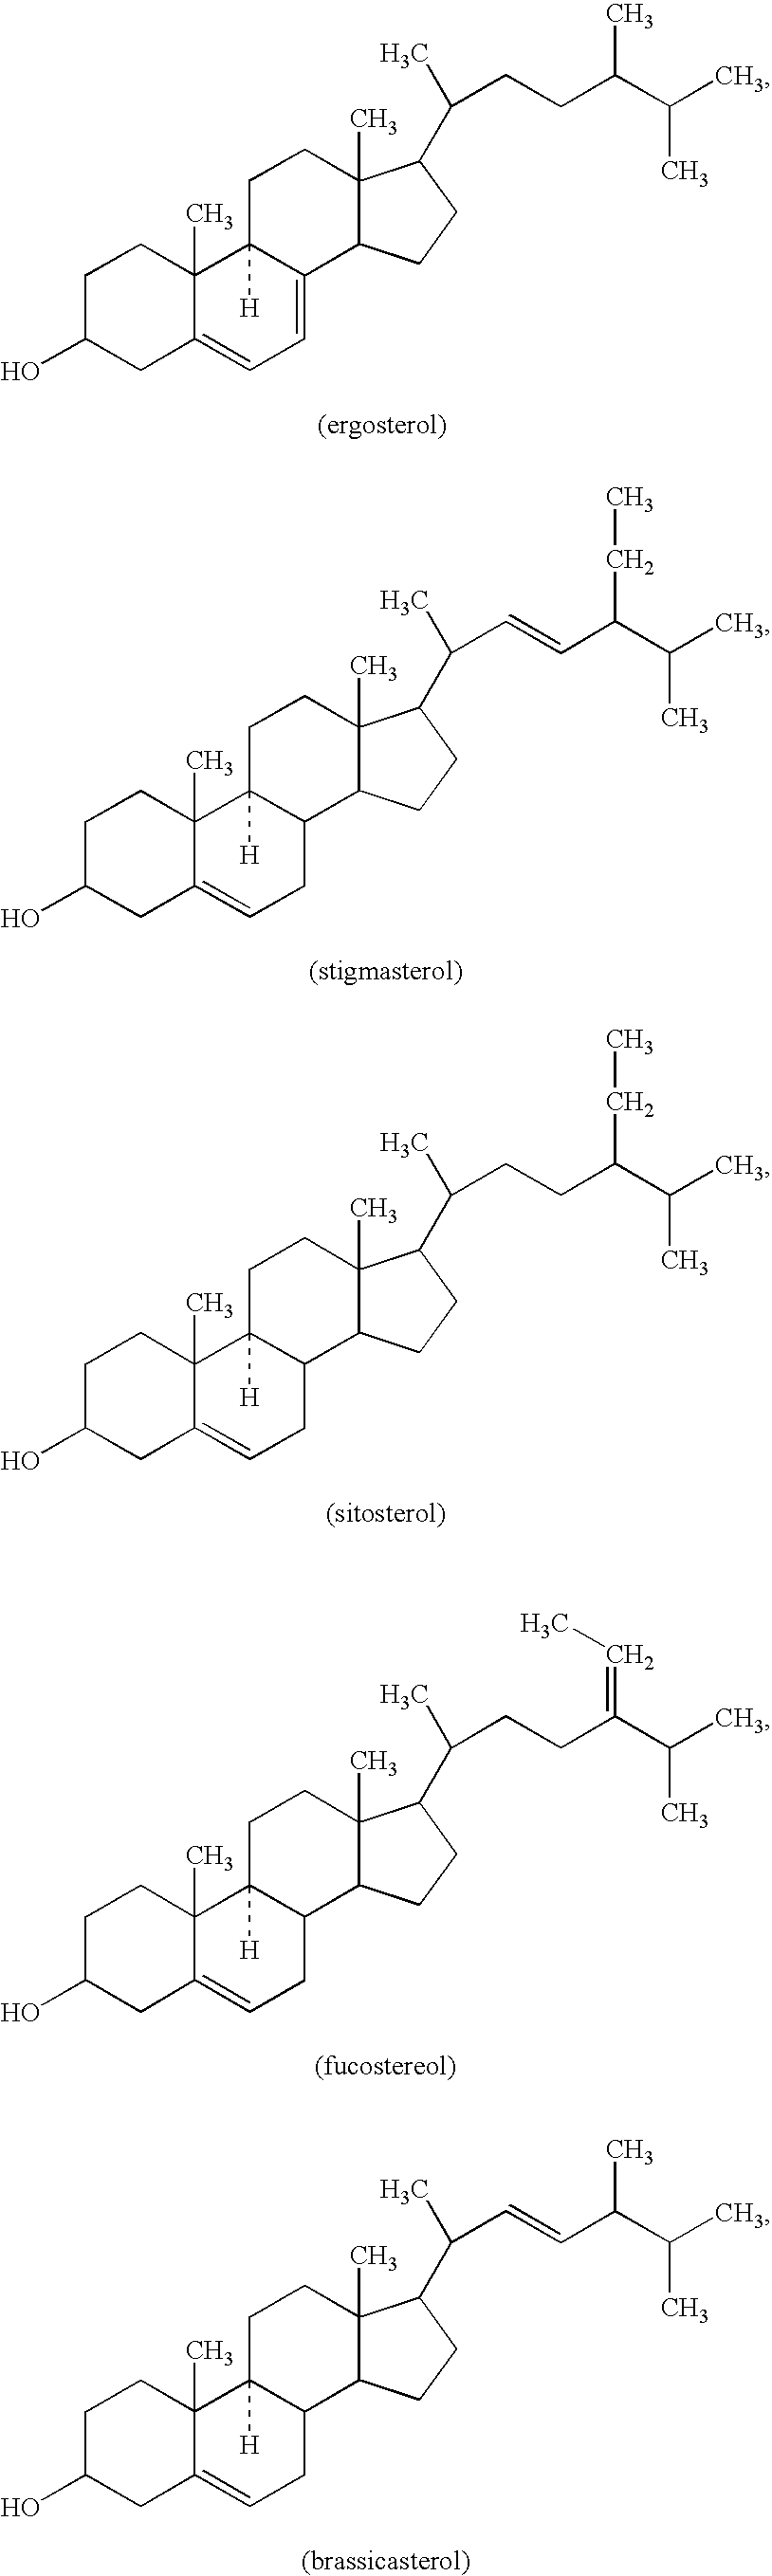 Taurine-containing preparations for improving the skin barrier